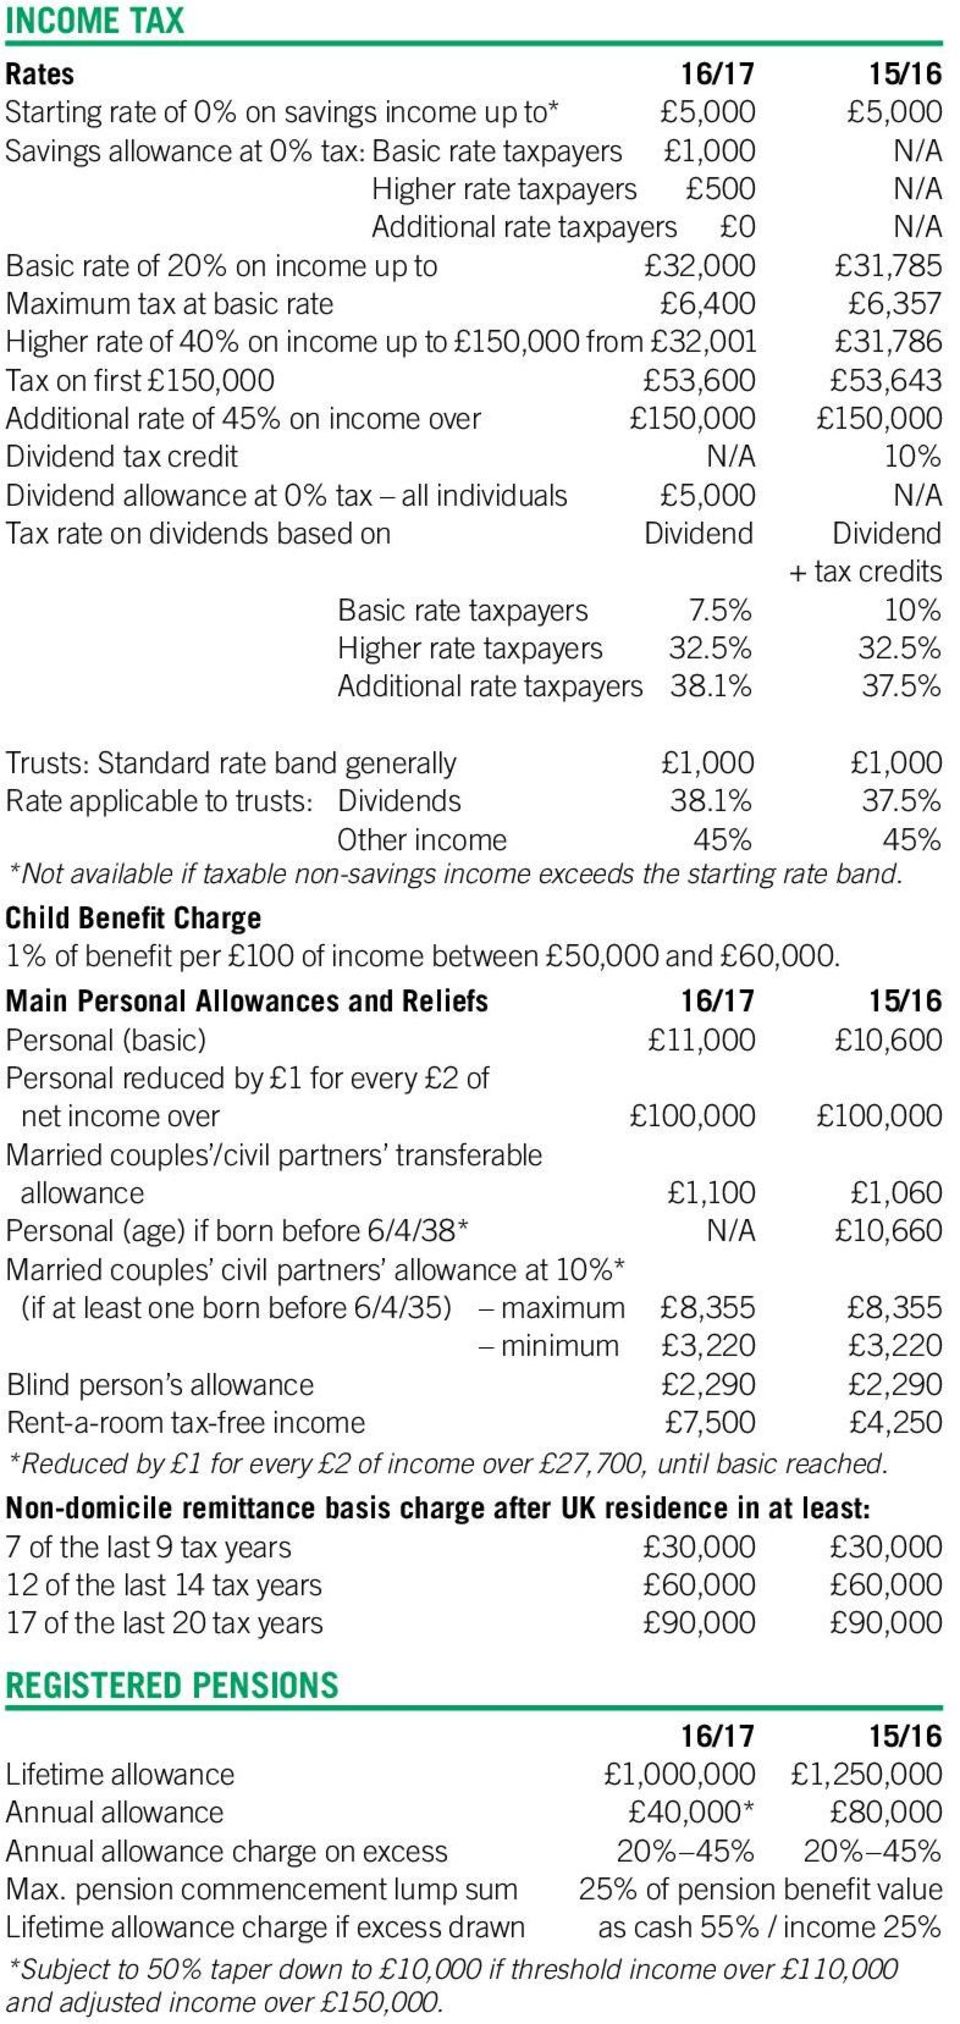 of 45% on income over 150,000 150,000 Dividend tax credit N/A 10% Dividend allowance at 0% tax all individuals 5,000 N/A Tax rate on dividends based on Dividend Dividend + tax credits Basic rate